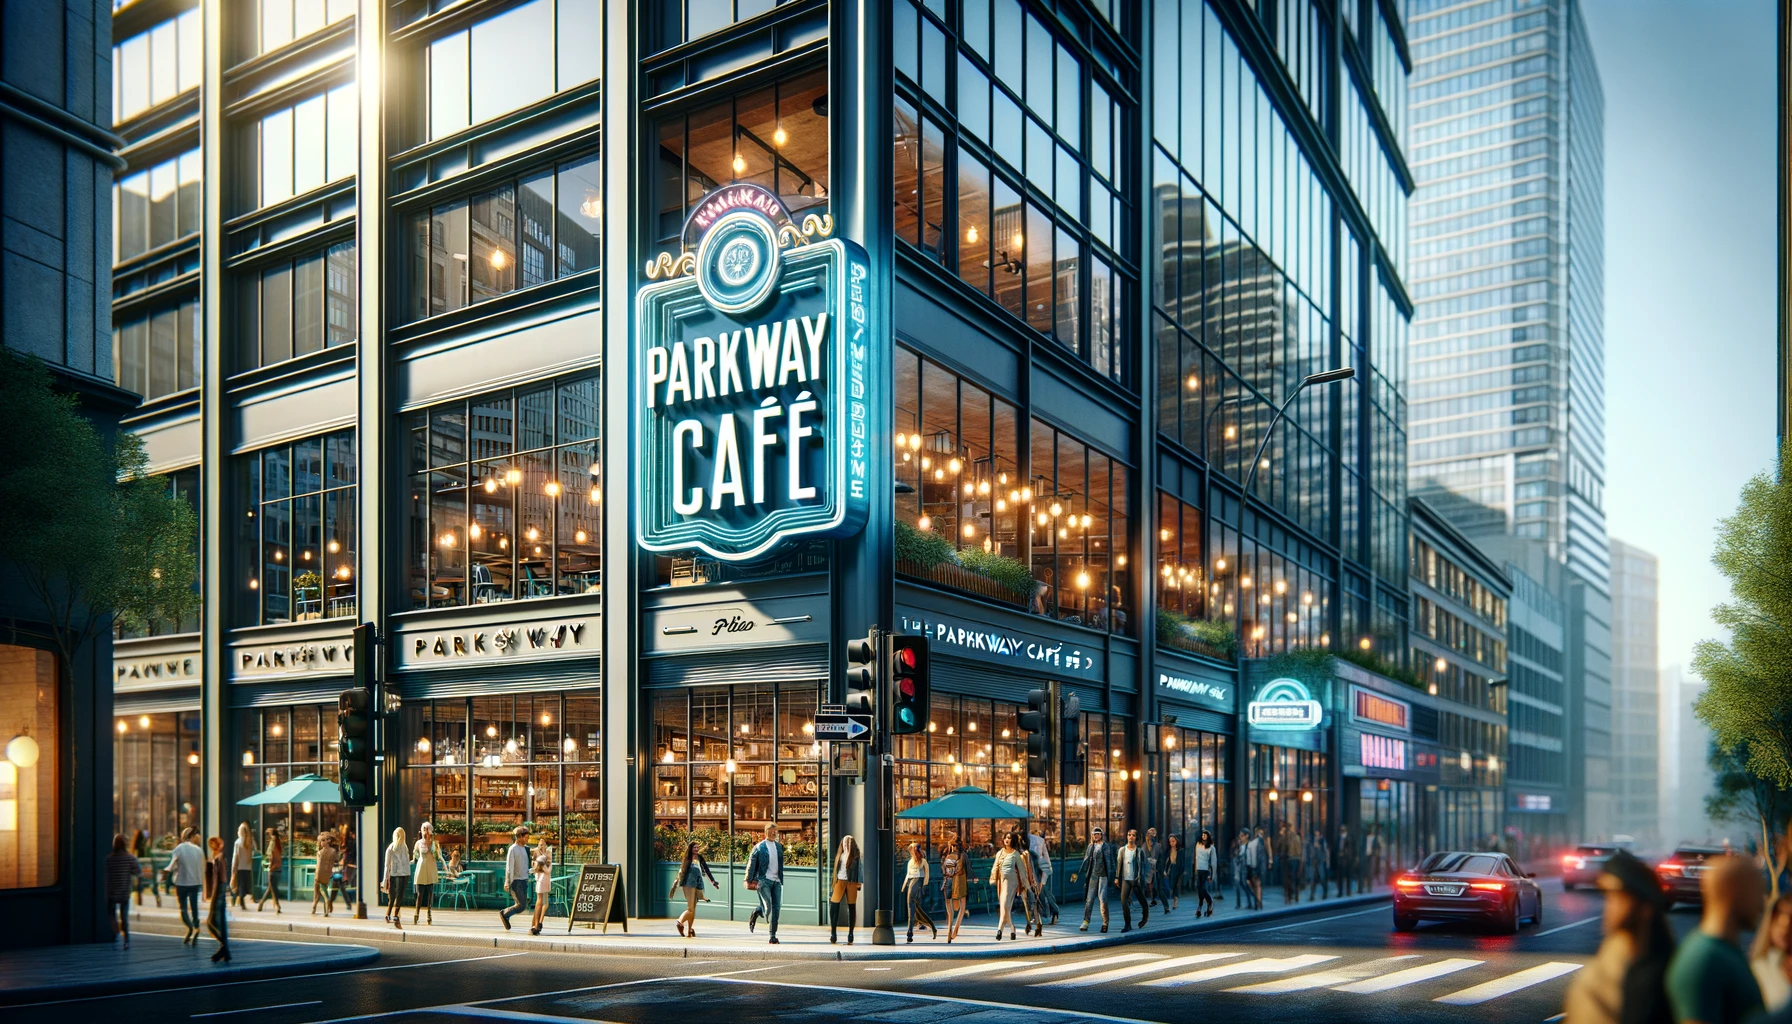 Realistic render of a bustling downtown environment, where the 'Parkway Café' logo from the first design shines brightly on a shop sign. The sign is attached to a modern glass building that reflects the city's vibrancy. The atmosphere is alive with diverse individuals of different descent and gender strolling on the sidewalks, cars driving by, and adjacent businesses adding to the urban ambience.